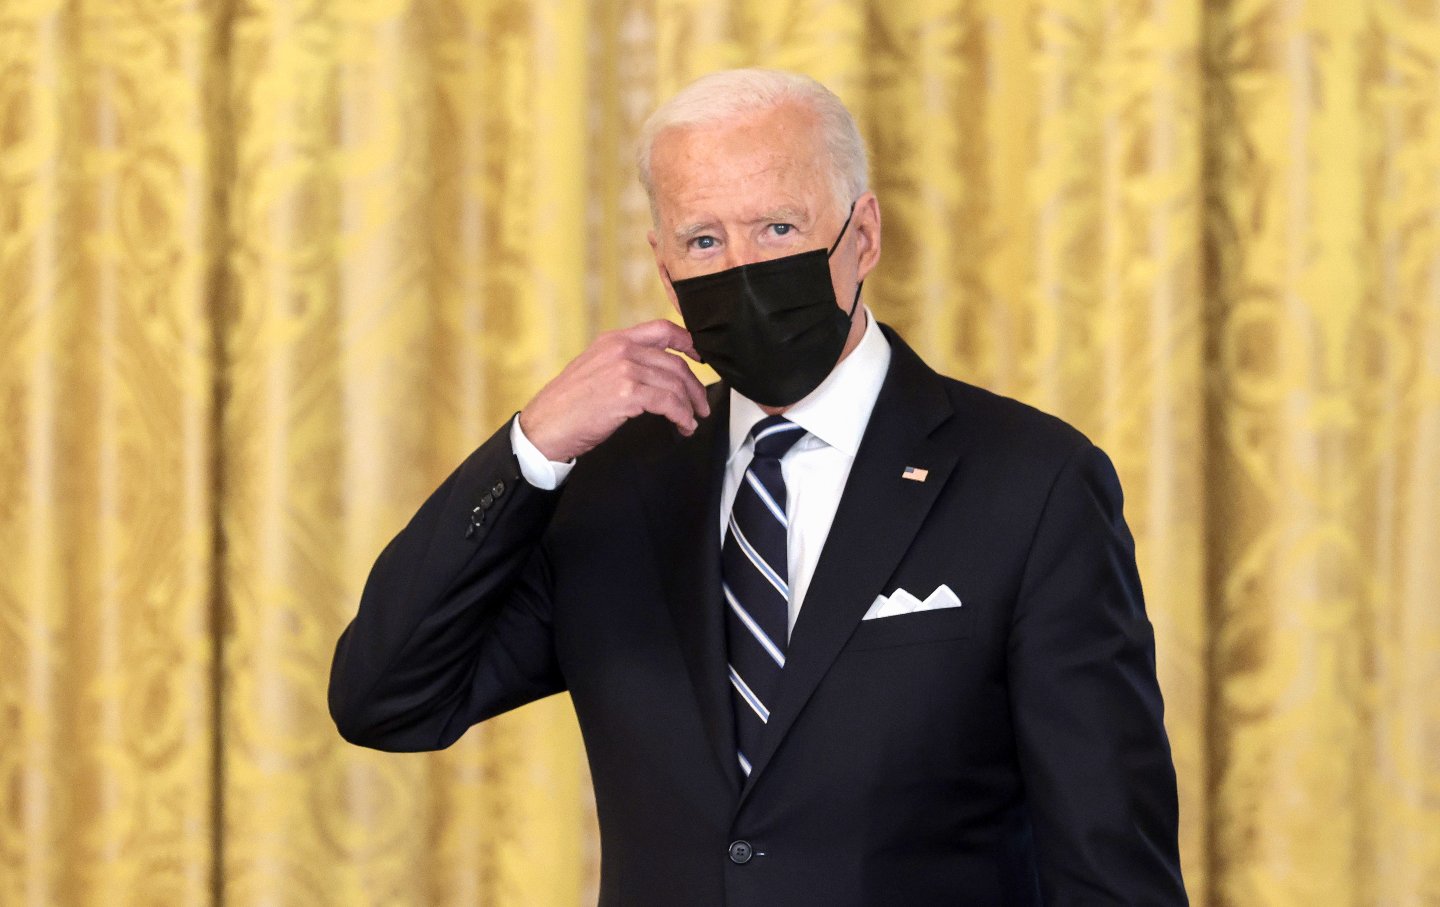 Sure, Biden’s Better on Covid Than Trump. That’s Not Good Enough.